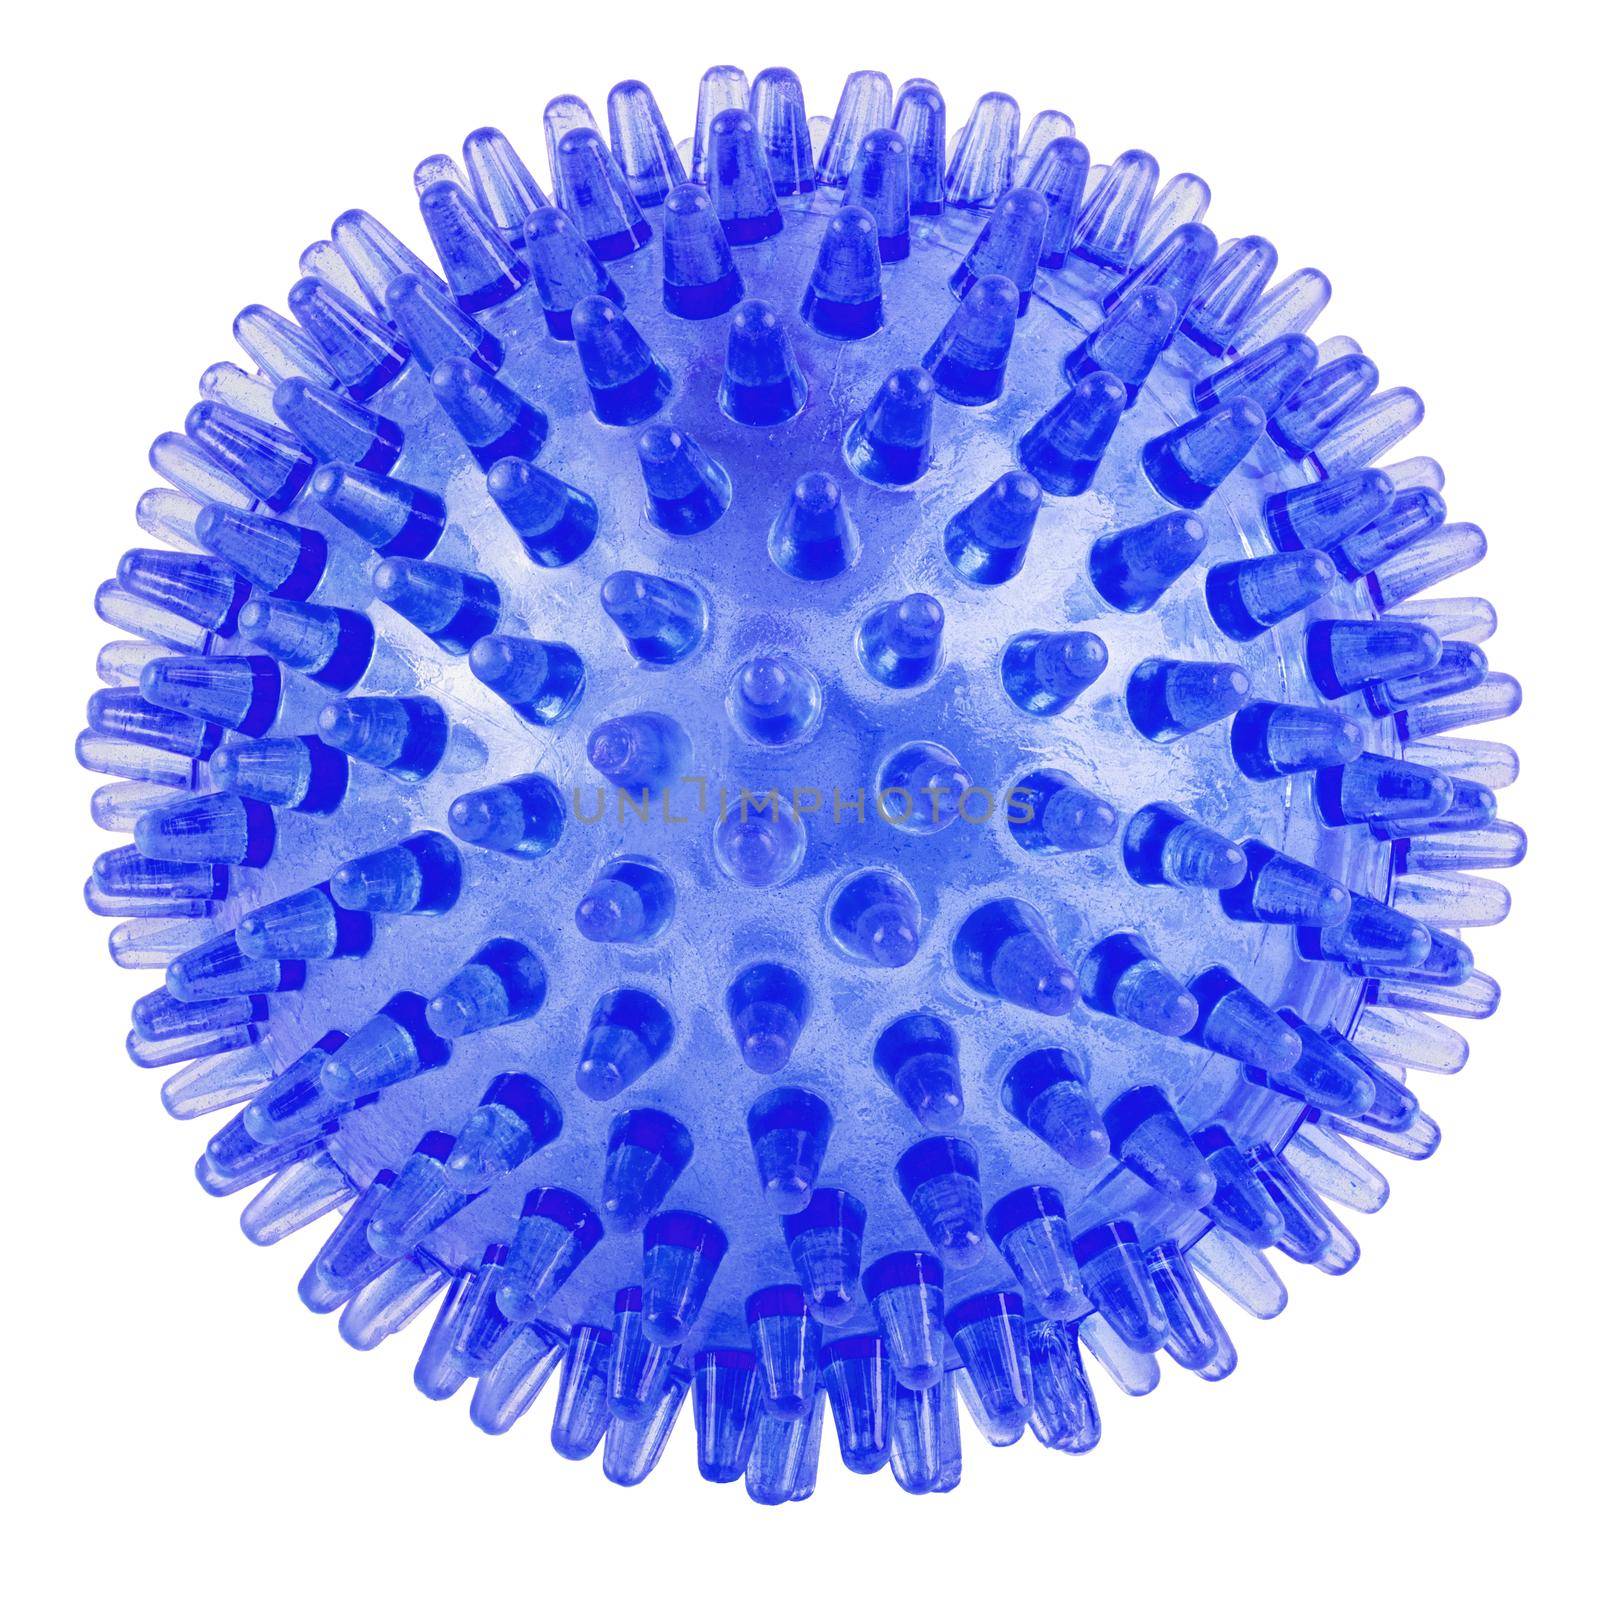 transparent dark blue spiked plastic ball isolated on white background - massager, dog toy and COVID-19 symbol by z1b